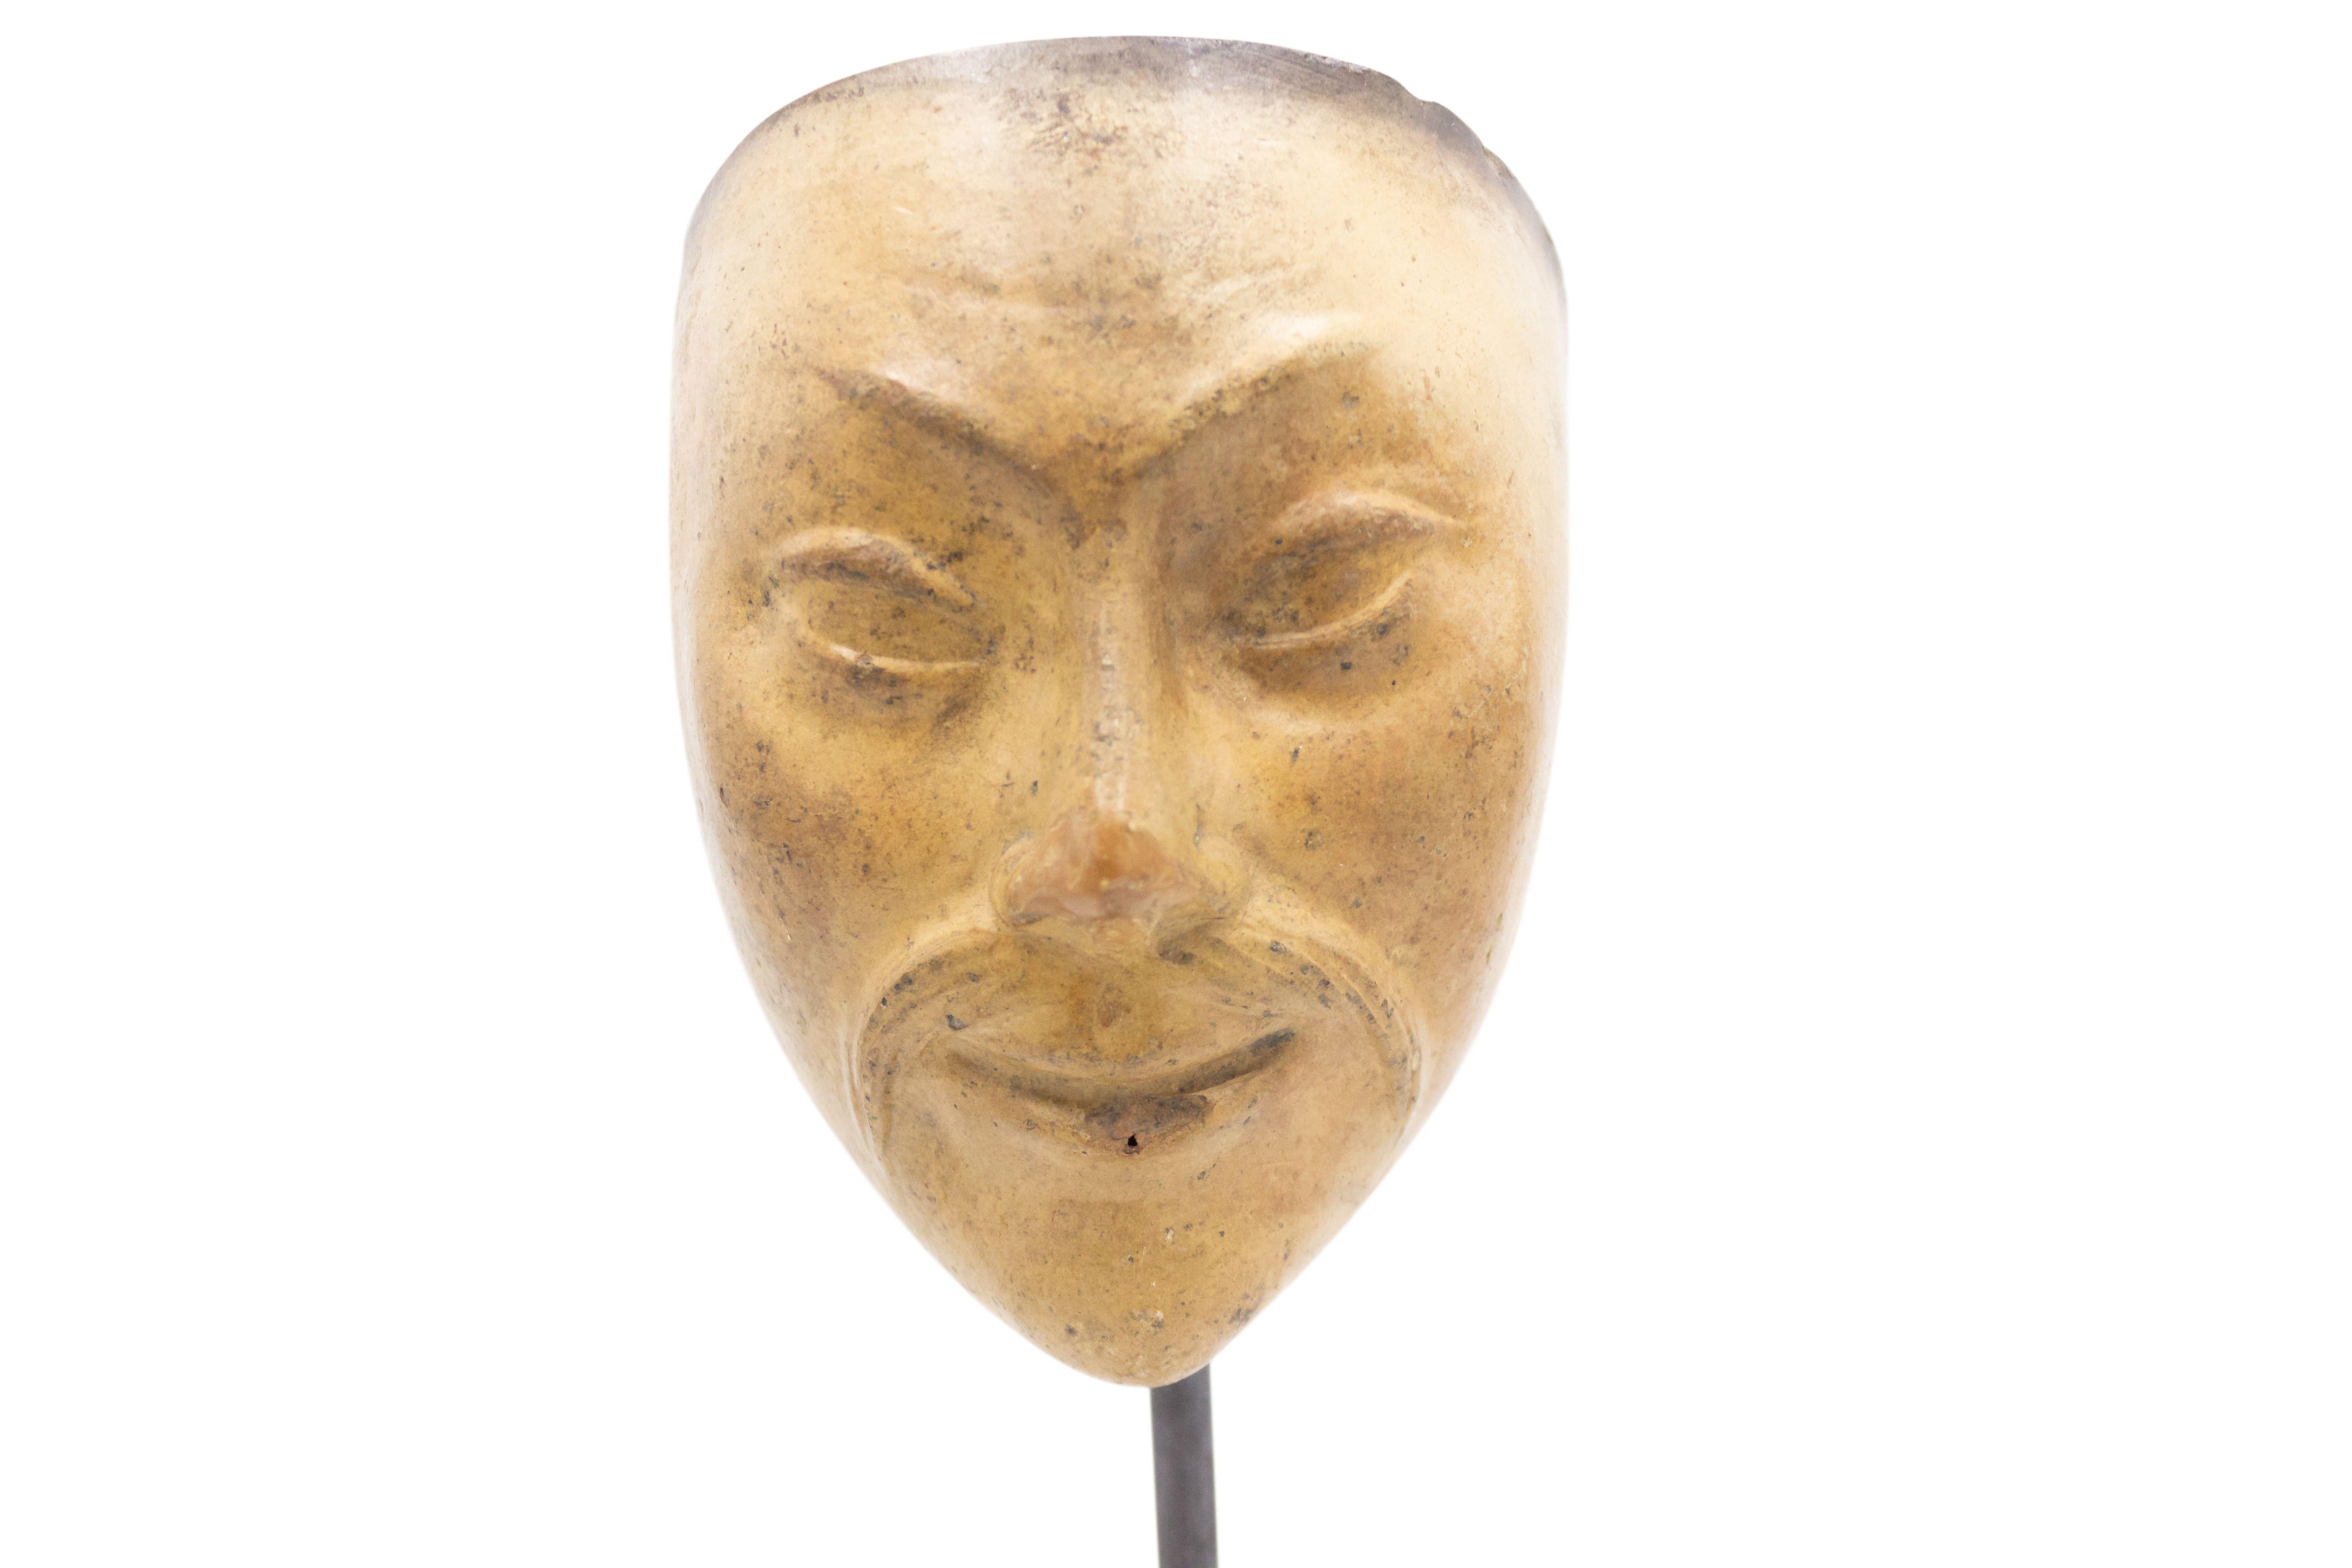 Continental German (late 19th Cent) sculpted terra-cotta master mask mold of a small Asian face with a mustache and initials 